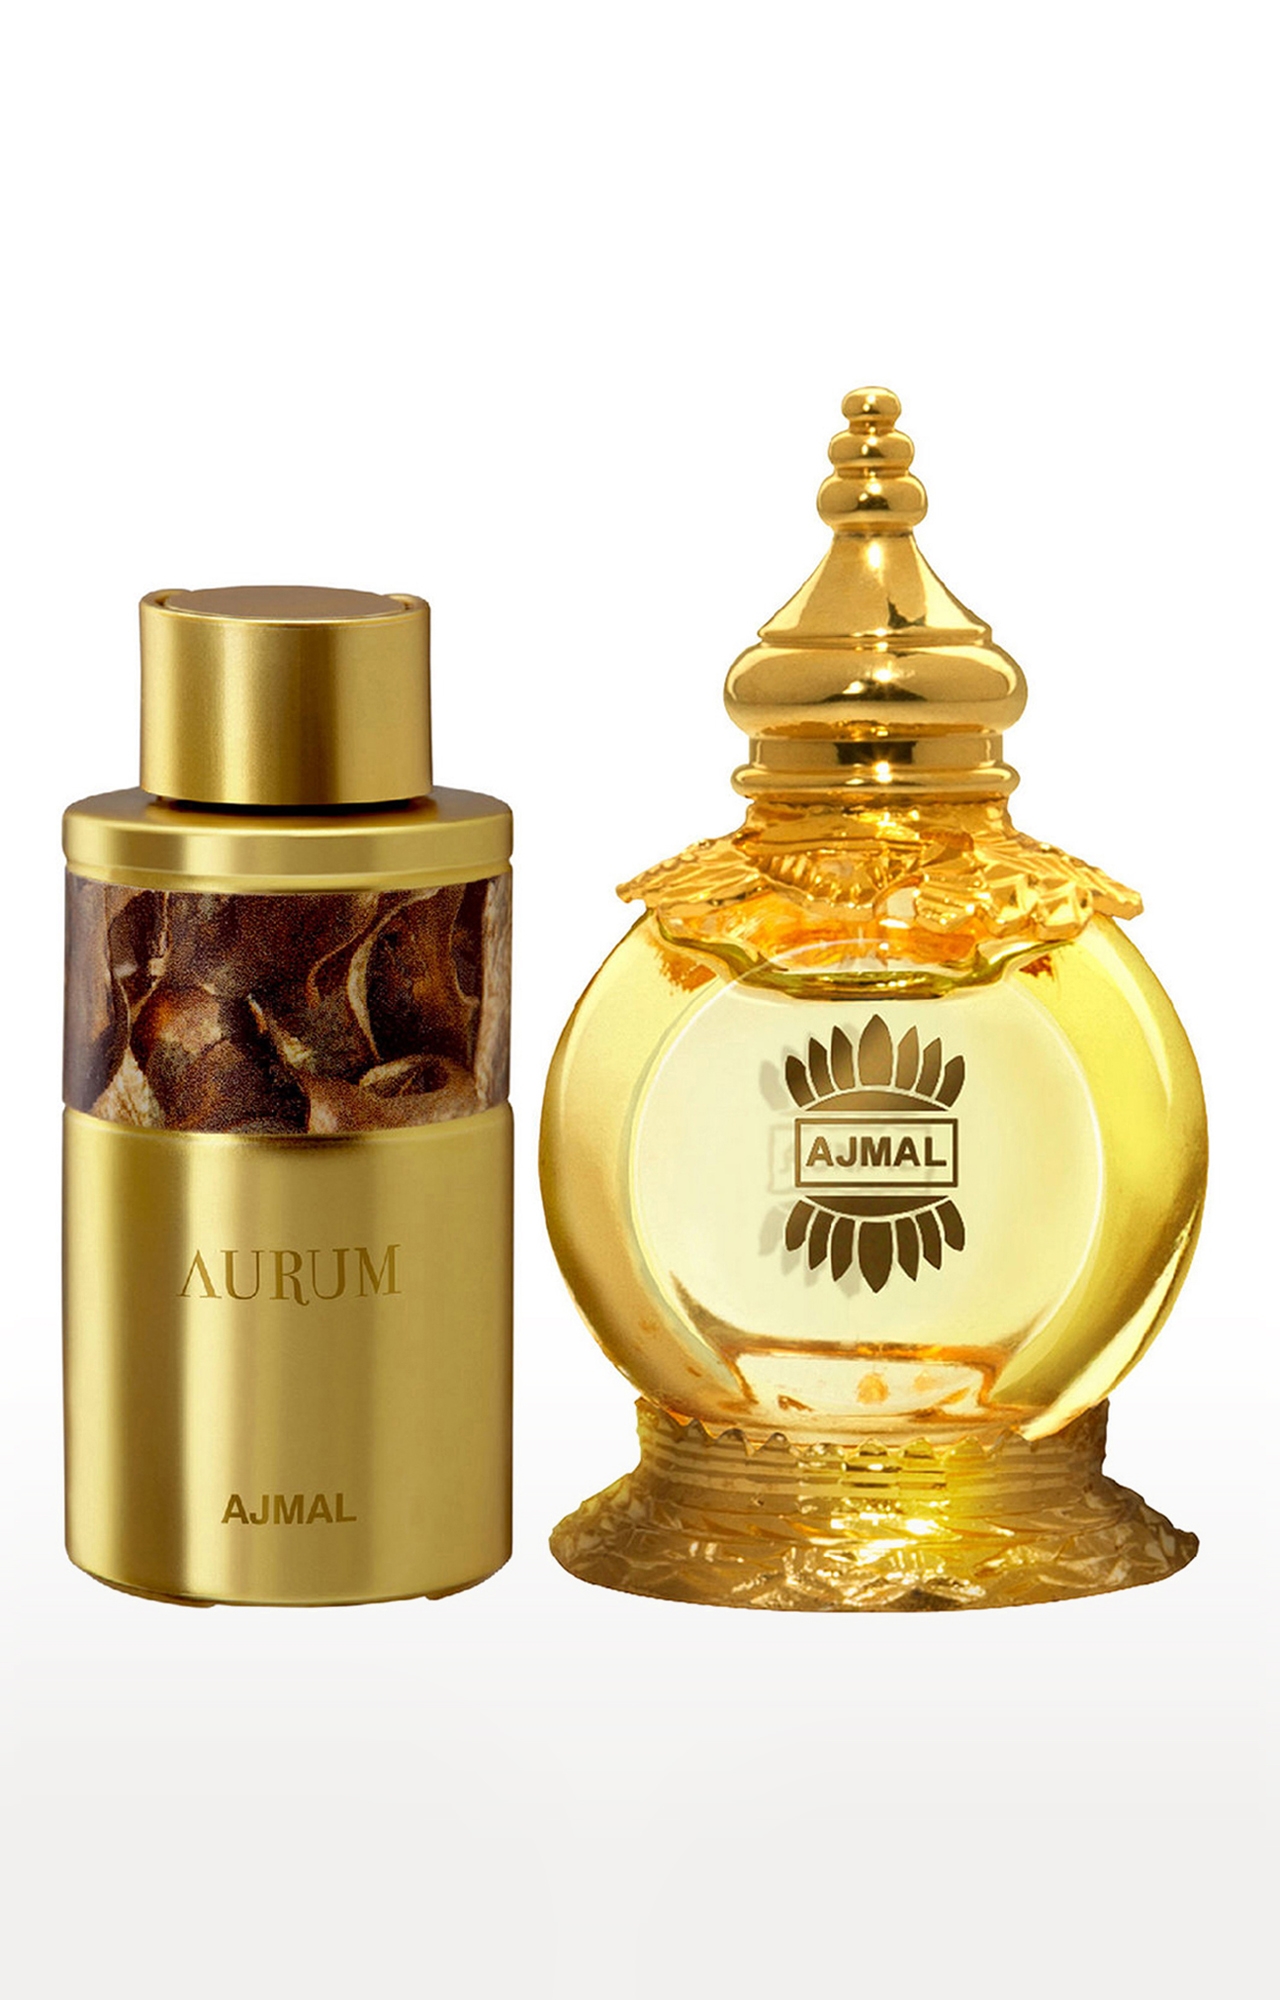 Ajmal | Ajmal Aurum Concentrated Perfume Oil Alcohol-free Attar 10ml for Women and Mukhallat AL Wafa Concentrated Perfume Oil Oriental Musky Alcohol-free Attar 12ml for Unisex 0